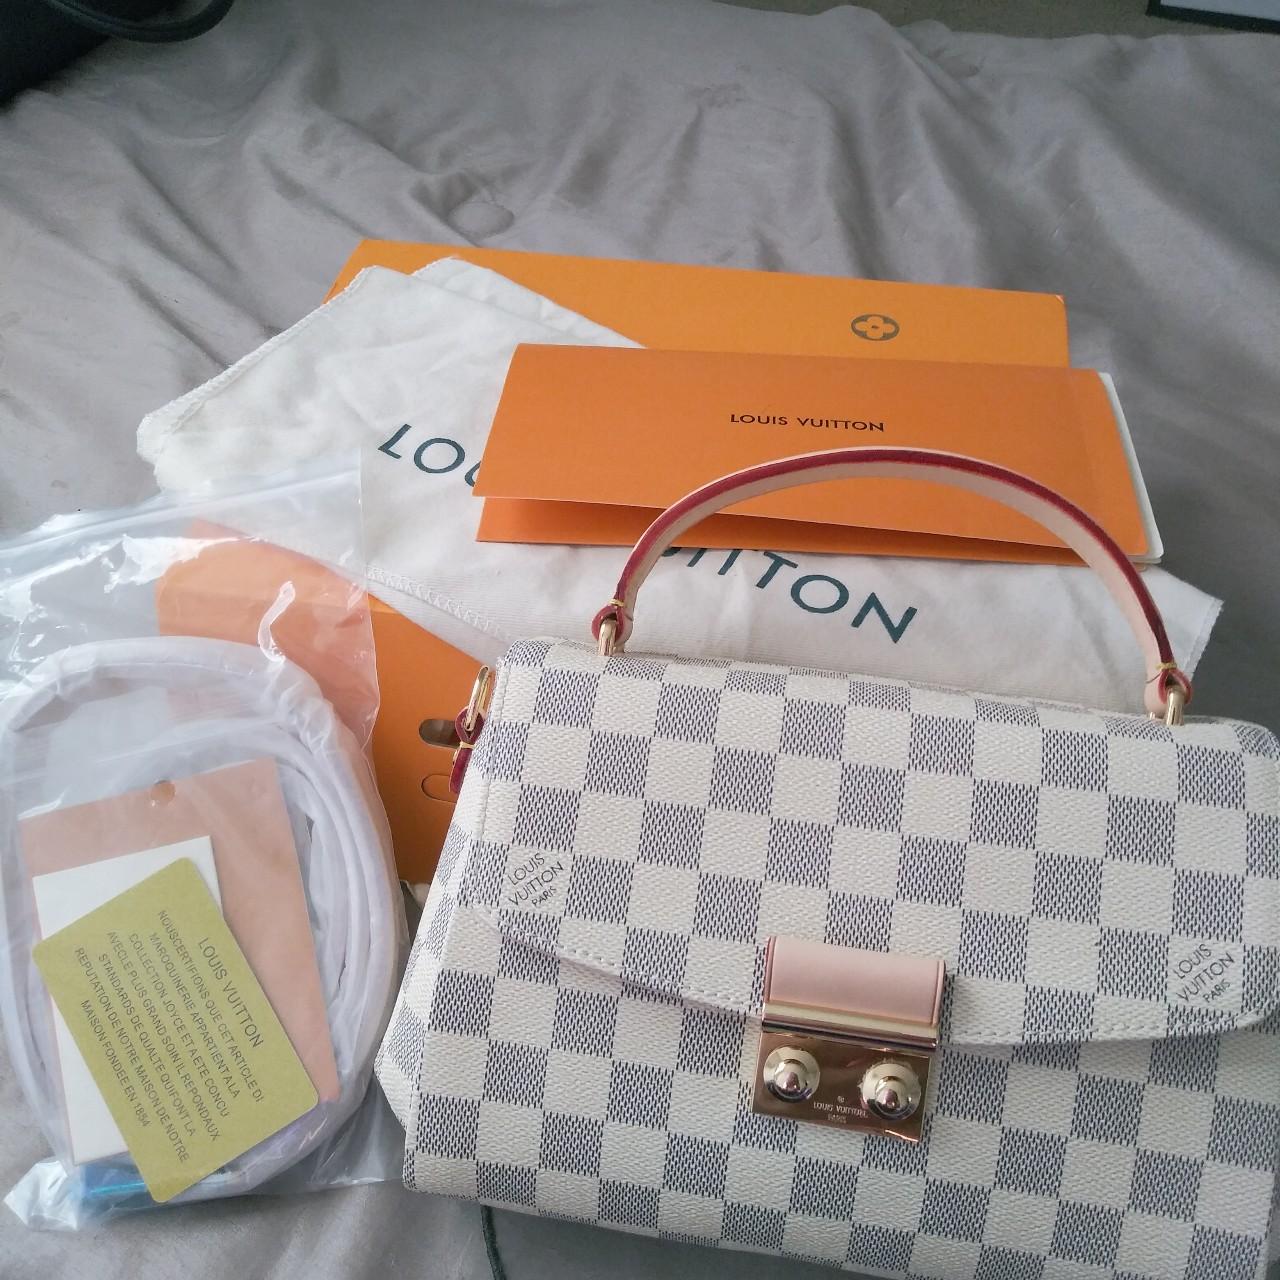 A must have to any Louis Vuitton collect. Stylish - Depop